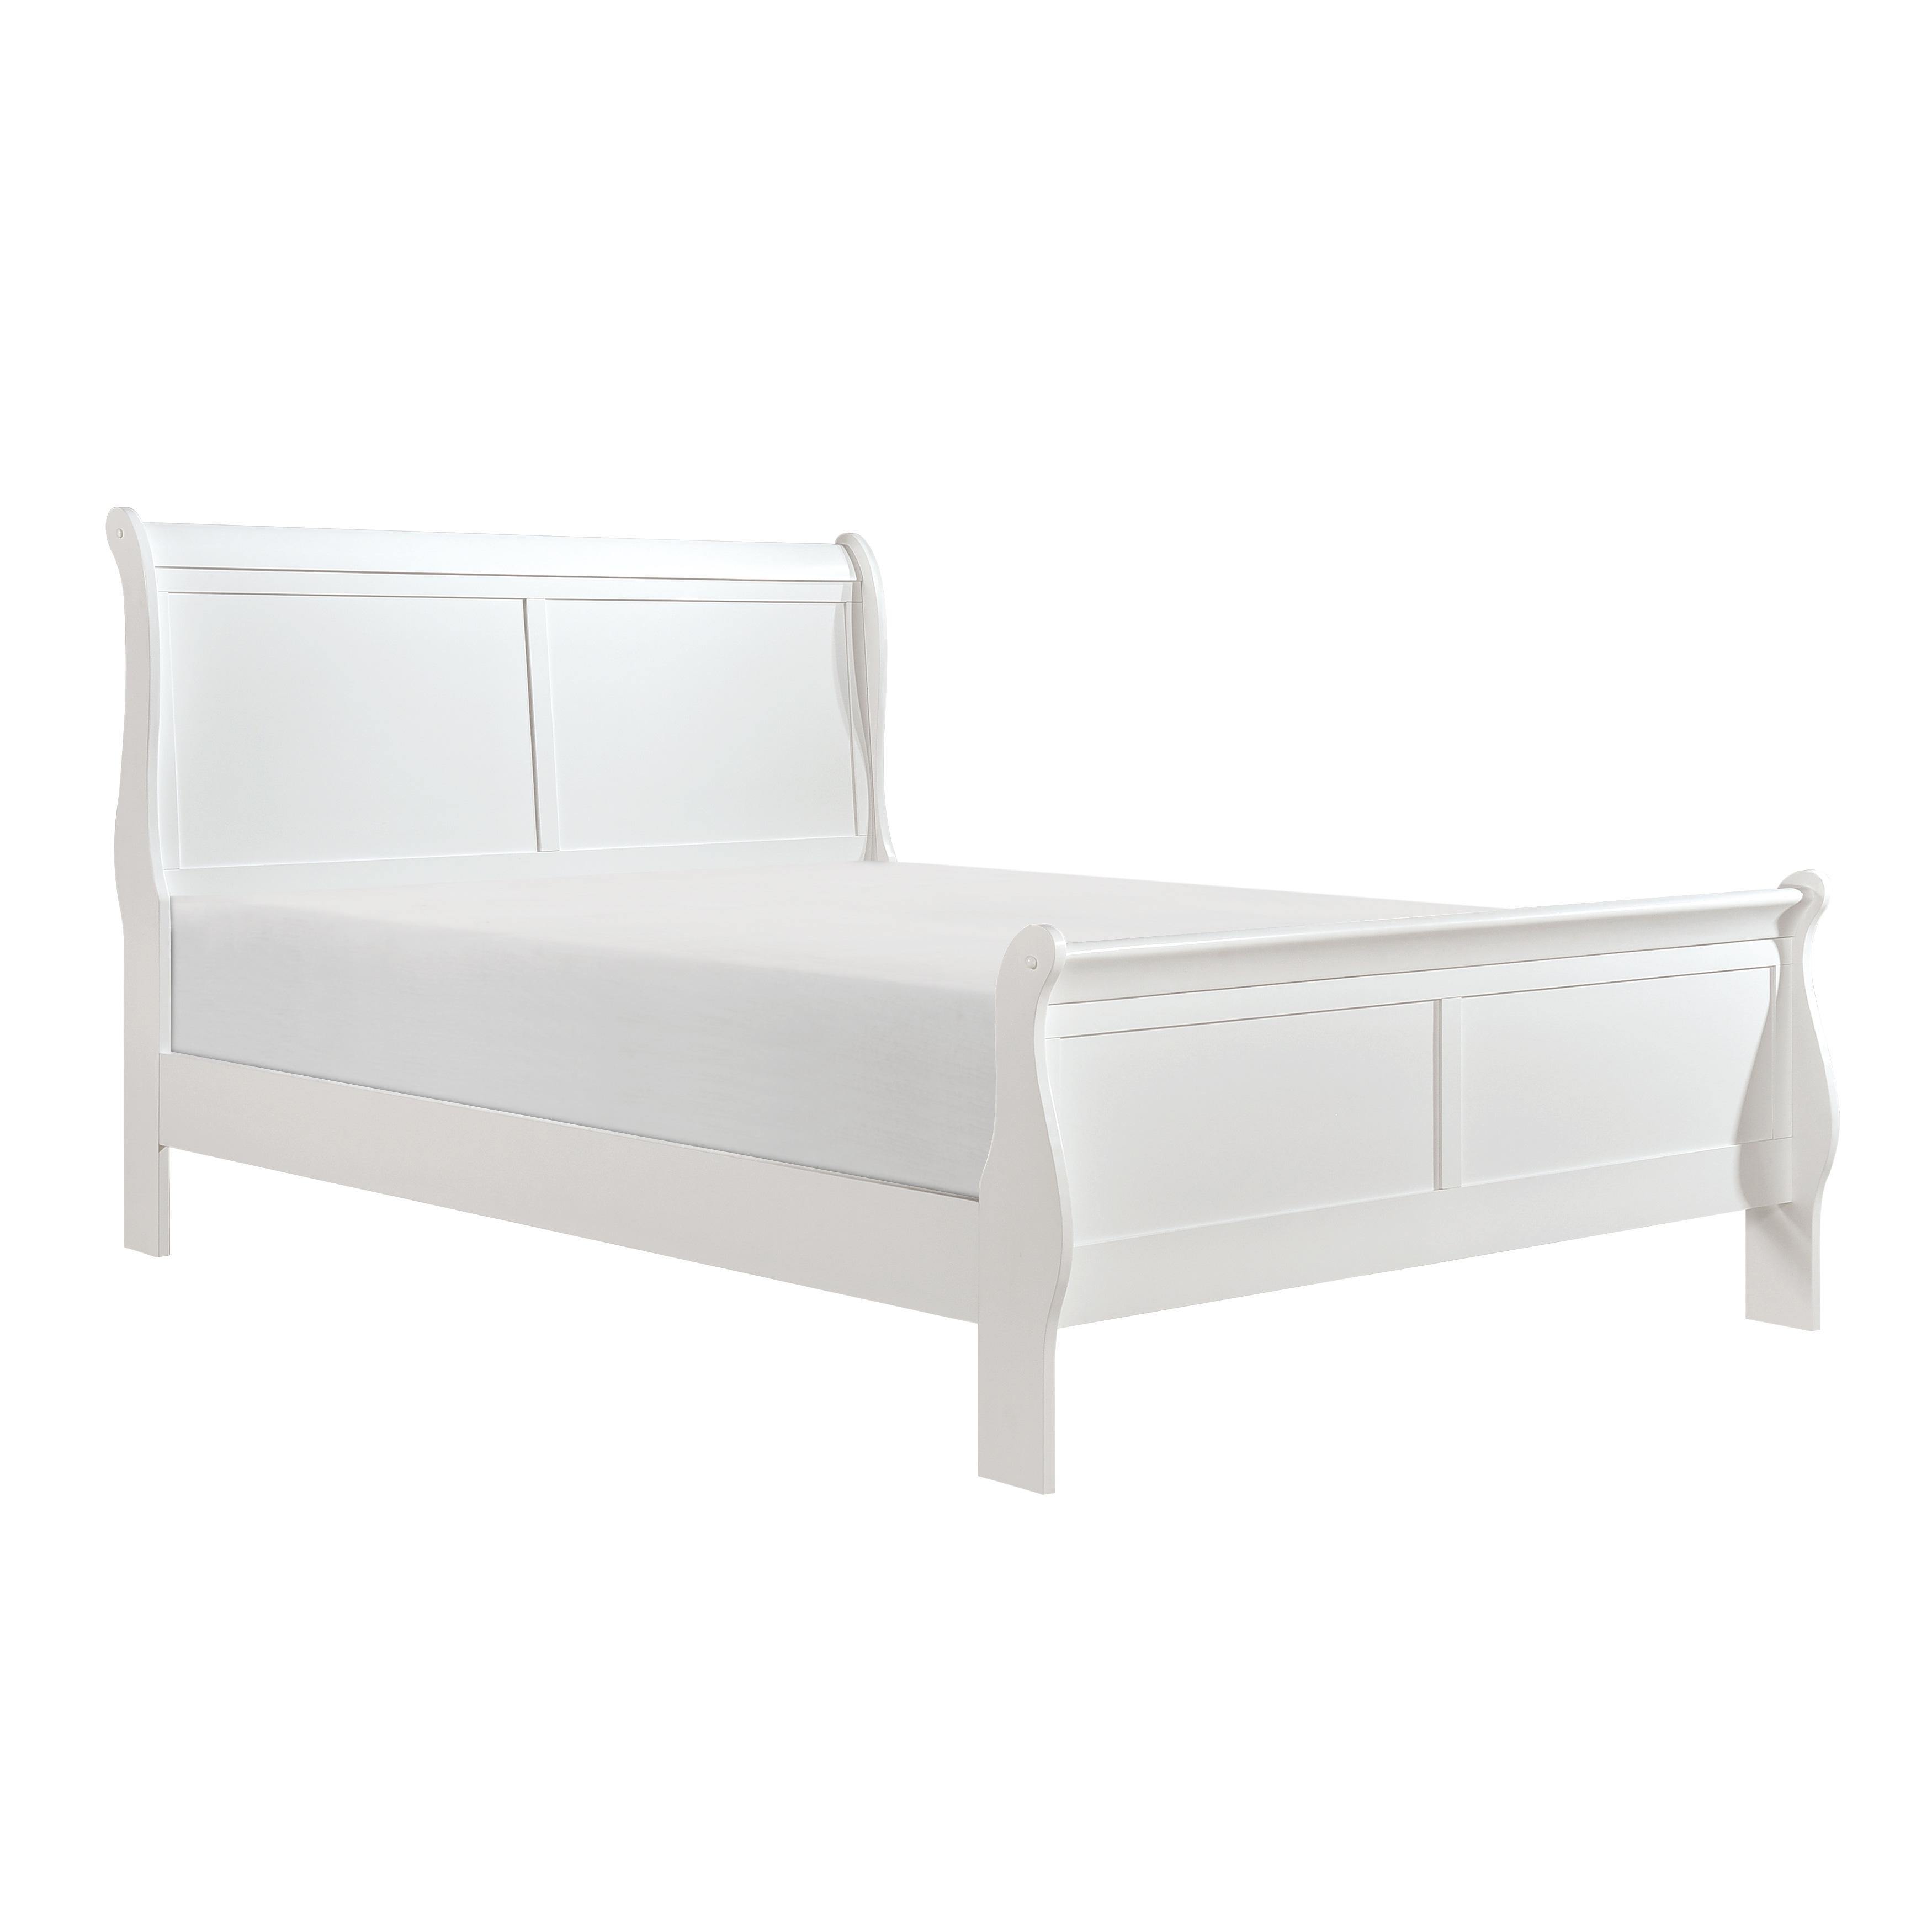 Traditional Bed 2147FW-1* Mayville 2147FW-1* in White 